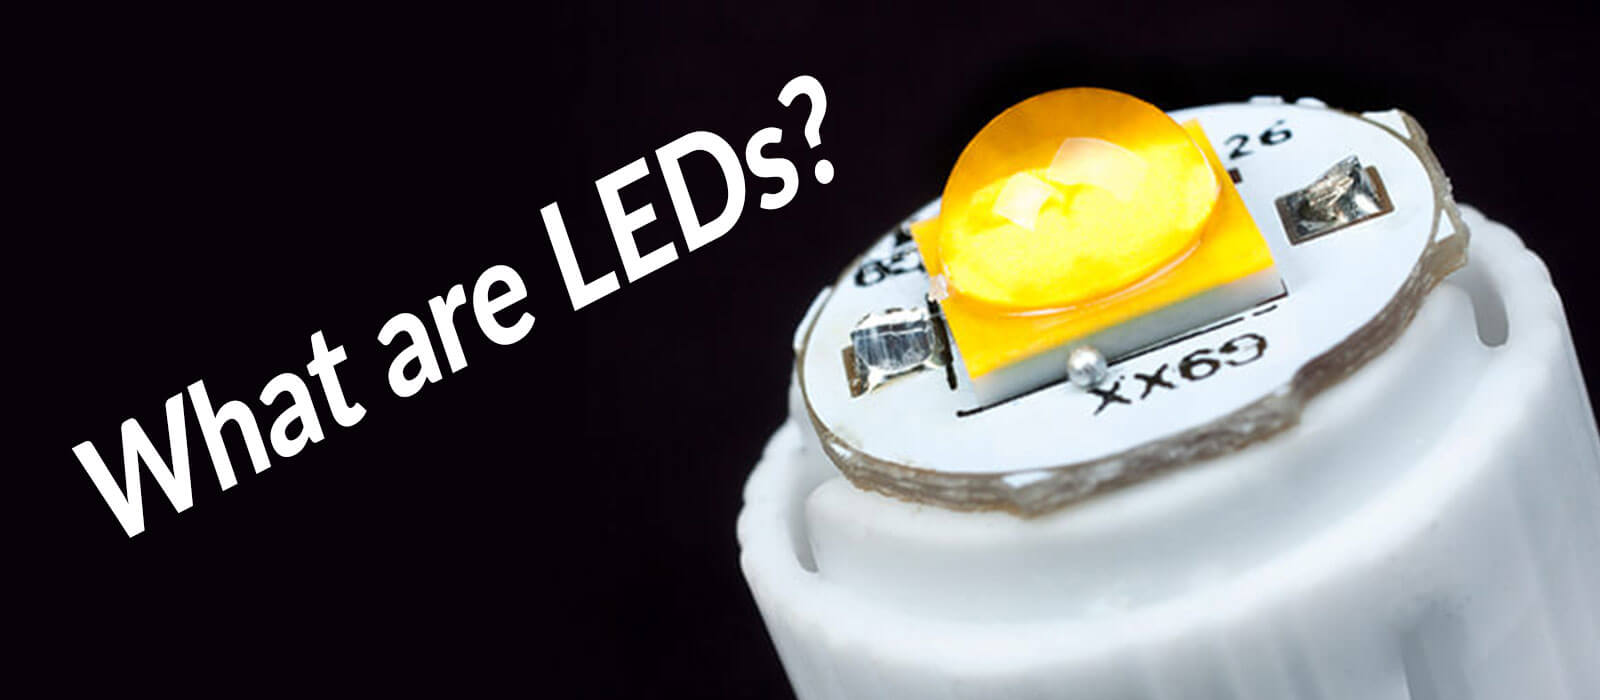 what are leds featured ledlam lighting 2 1600px